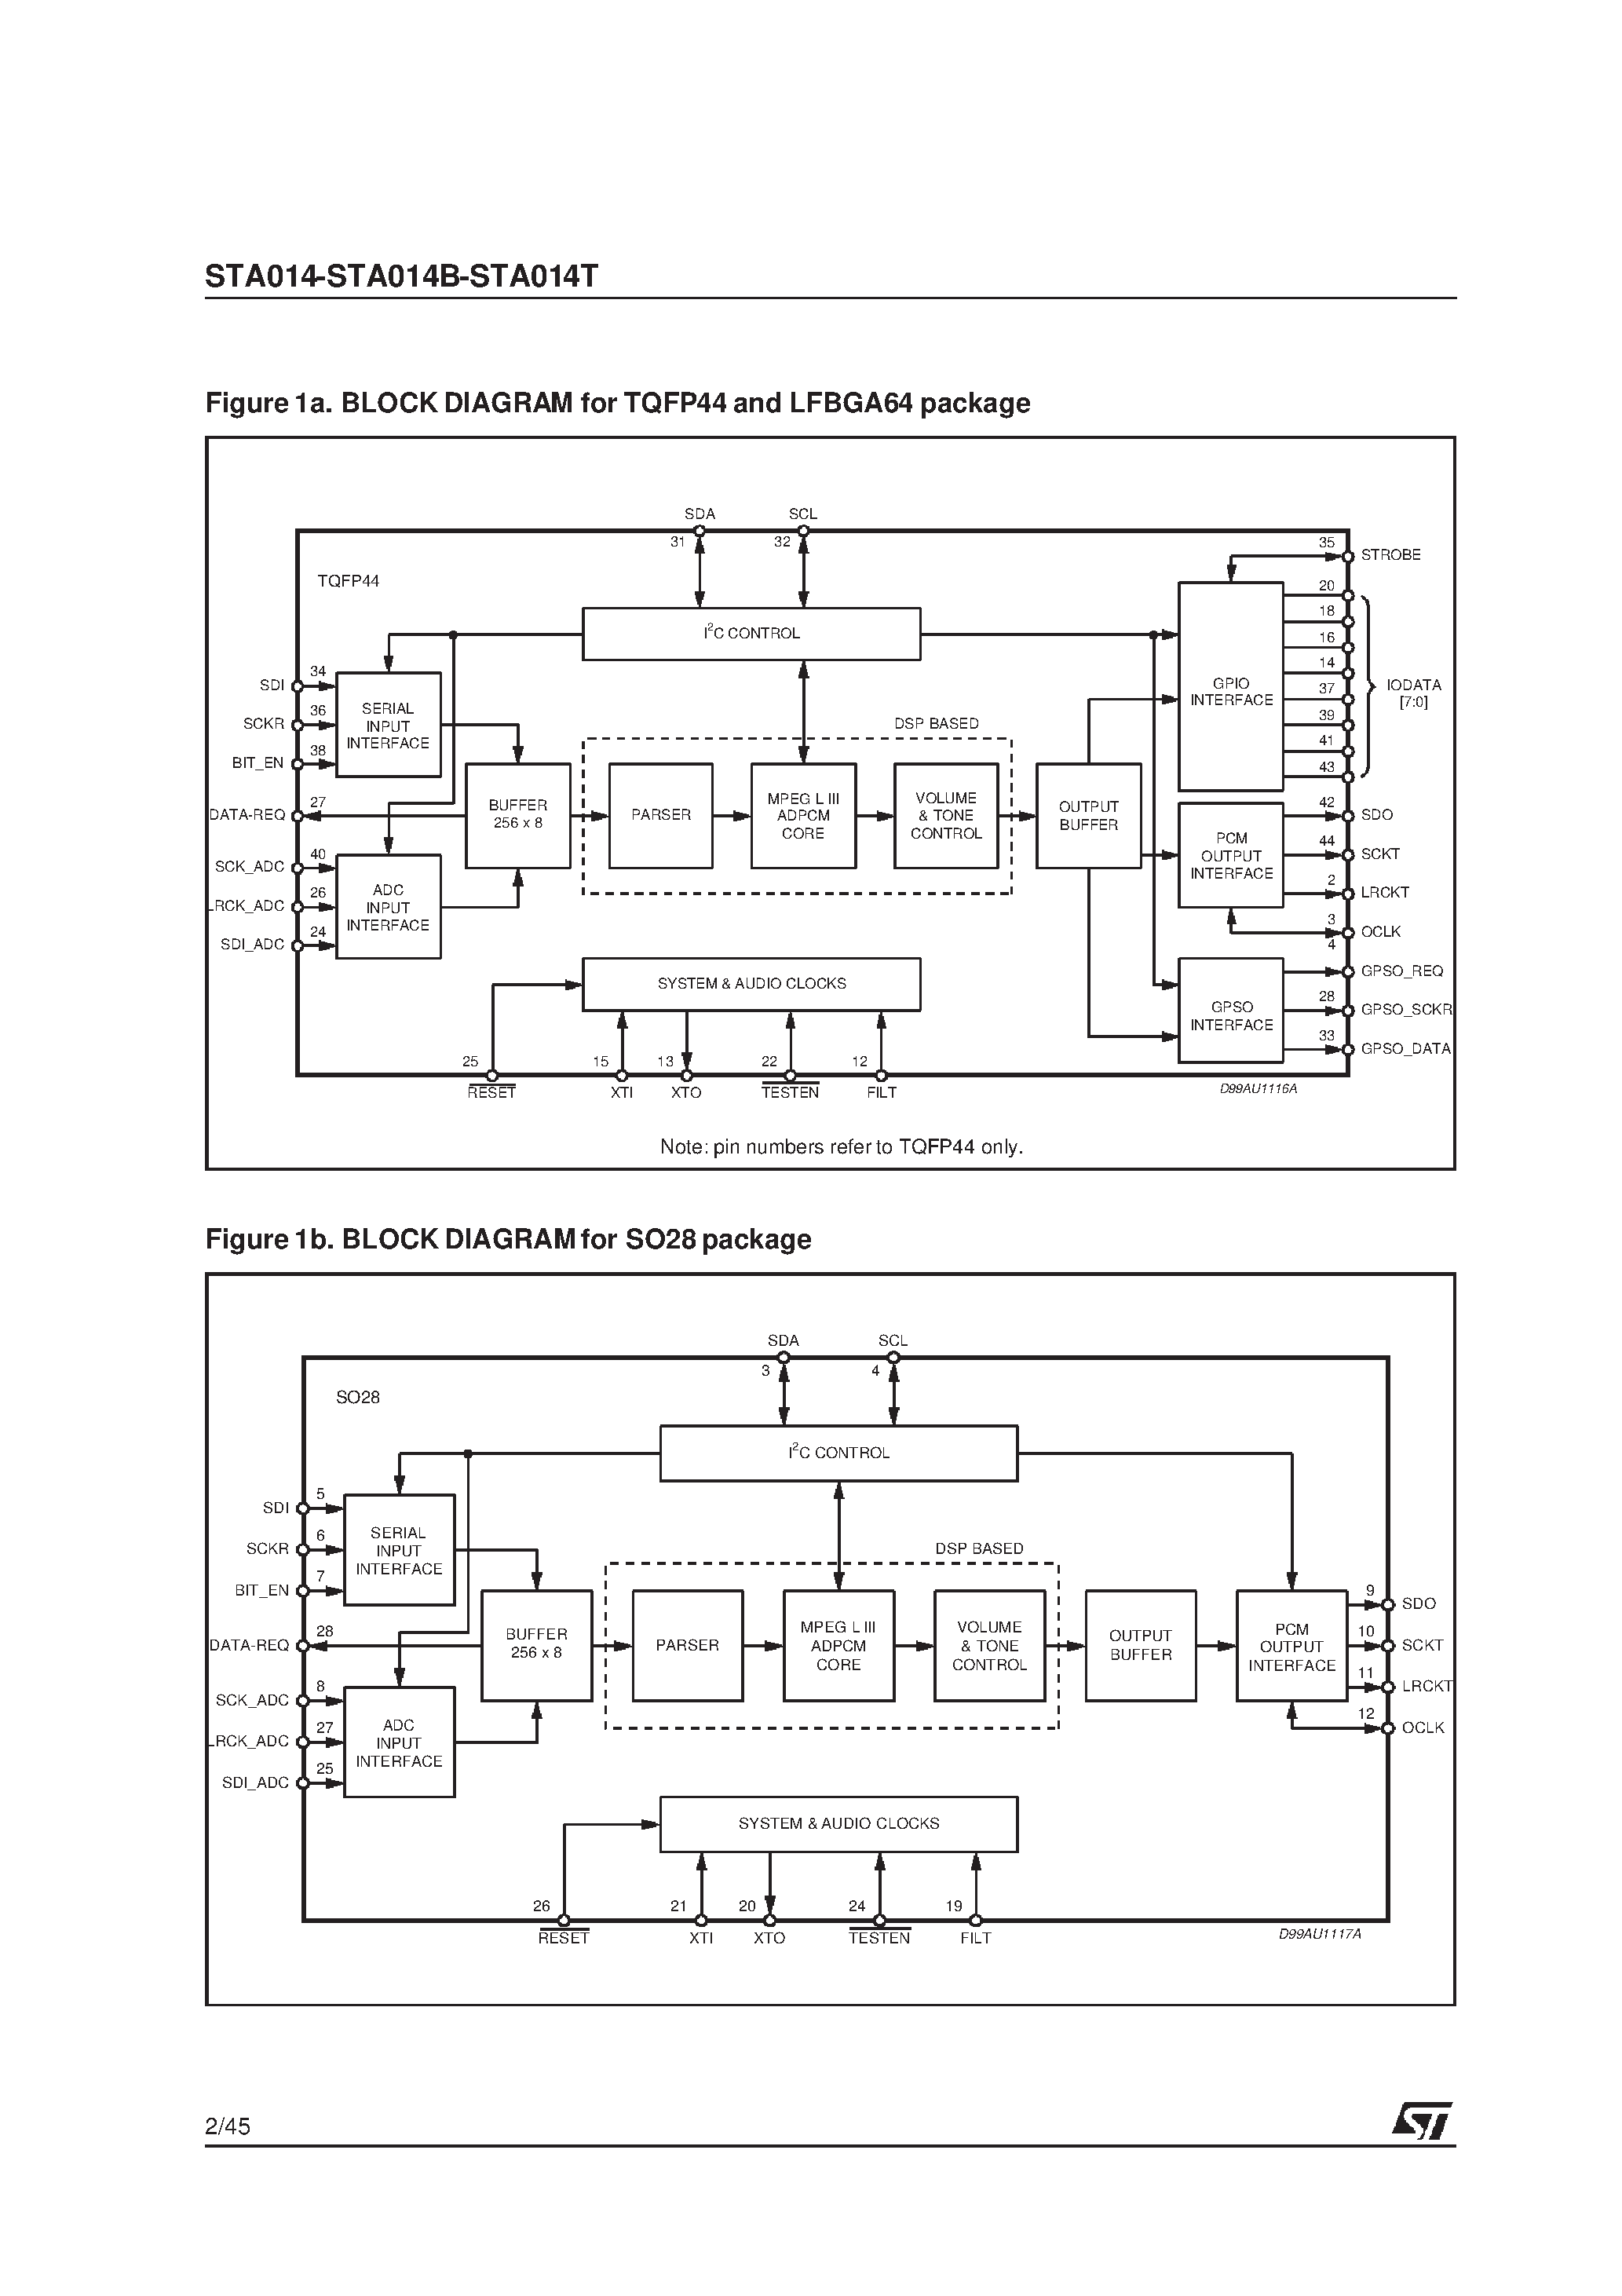 Datasheet STA014 - (STA014x) MPEG 2.5 LAYER III AUDIO DECODER WITH ADPCM AND SRS WOWO POSTPROCESSING CAPABILITY page 2